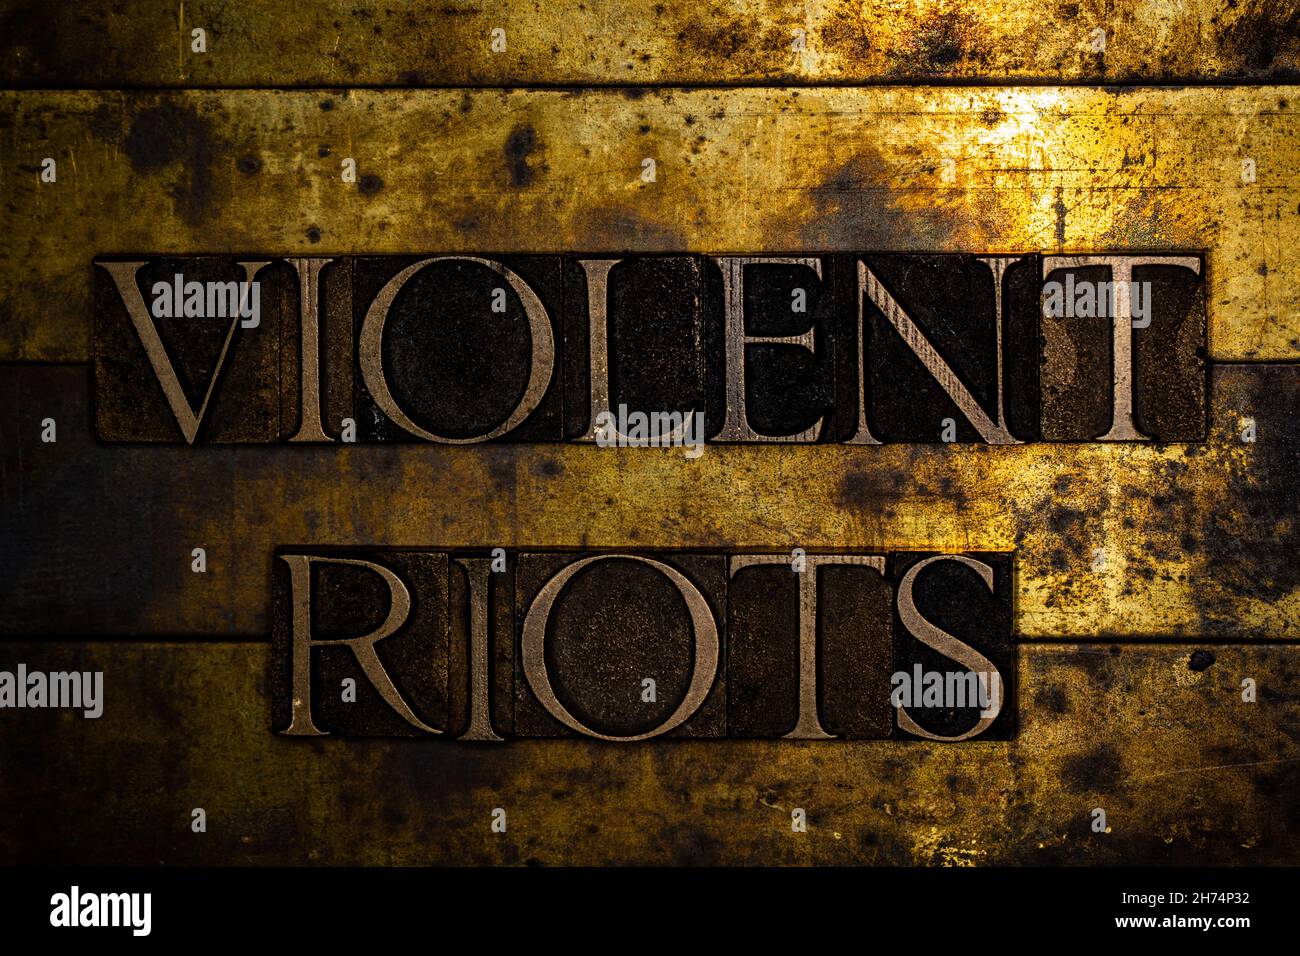 Violent Riots text message on textured grunge copper and vintage gold background Stock Photo